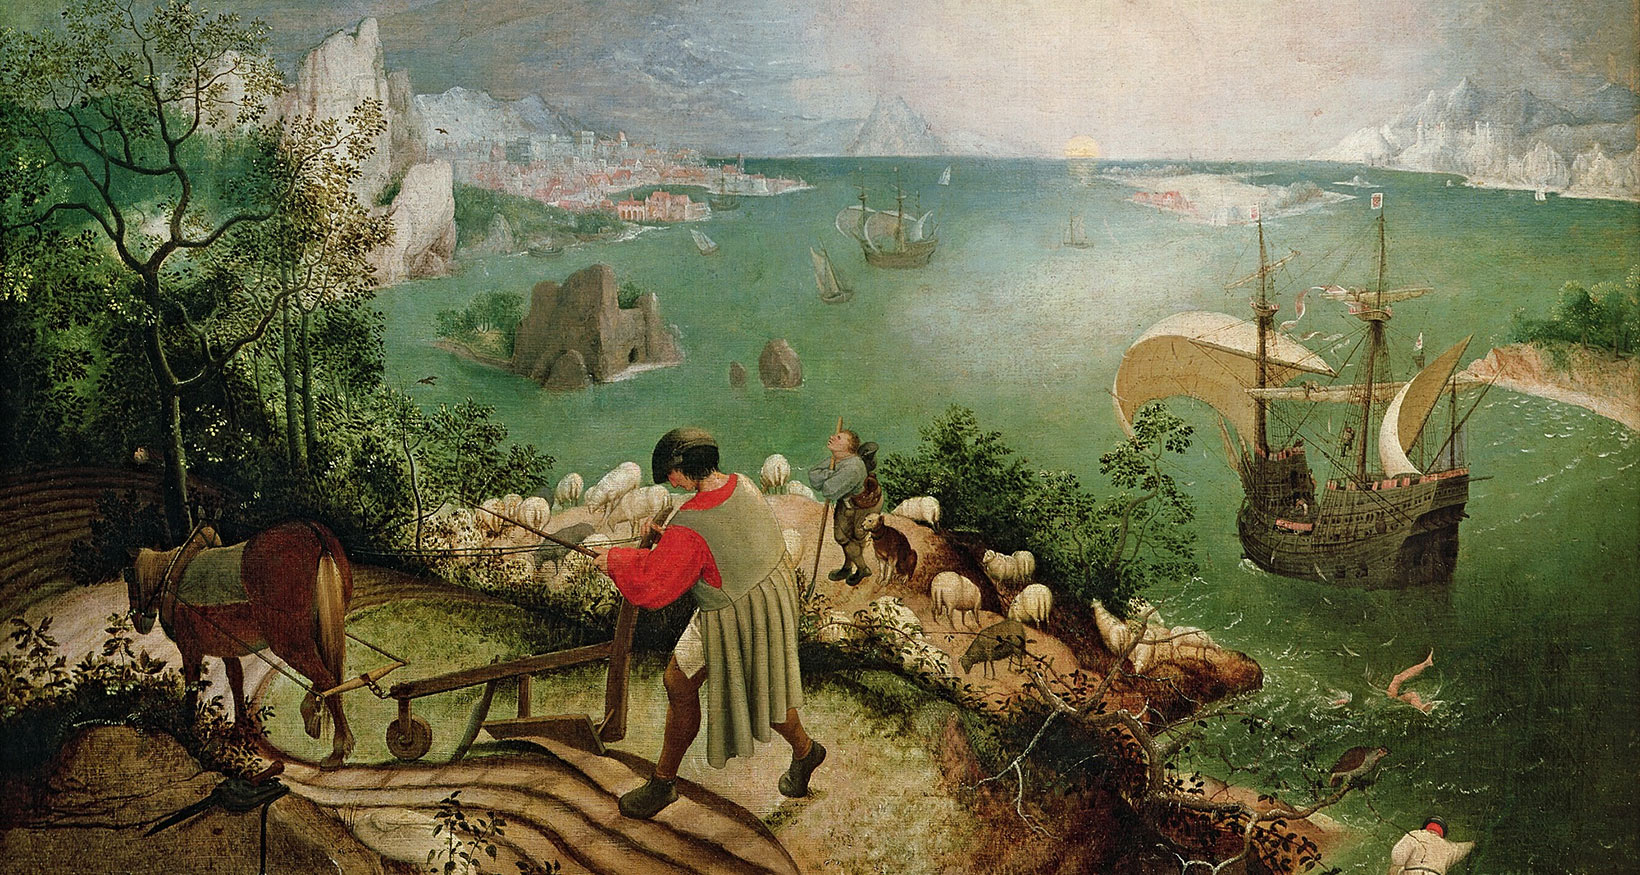 Landscape with The Fall of Icarus by Pieter Bruegel The Elder